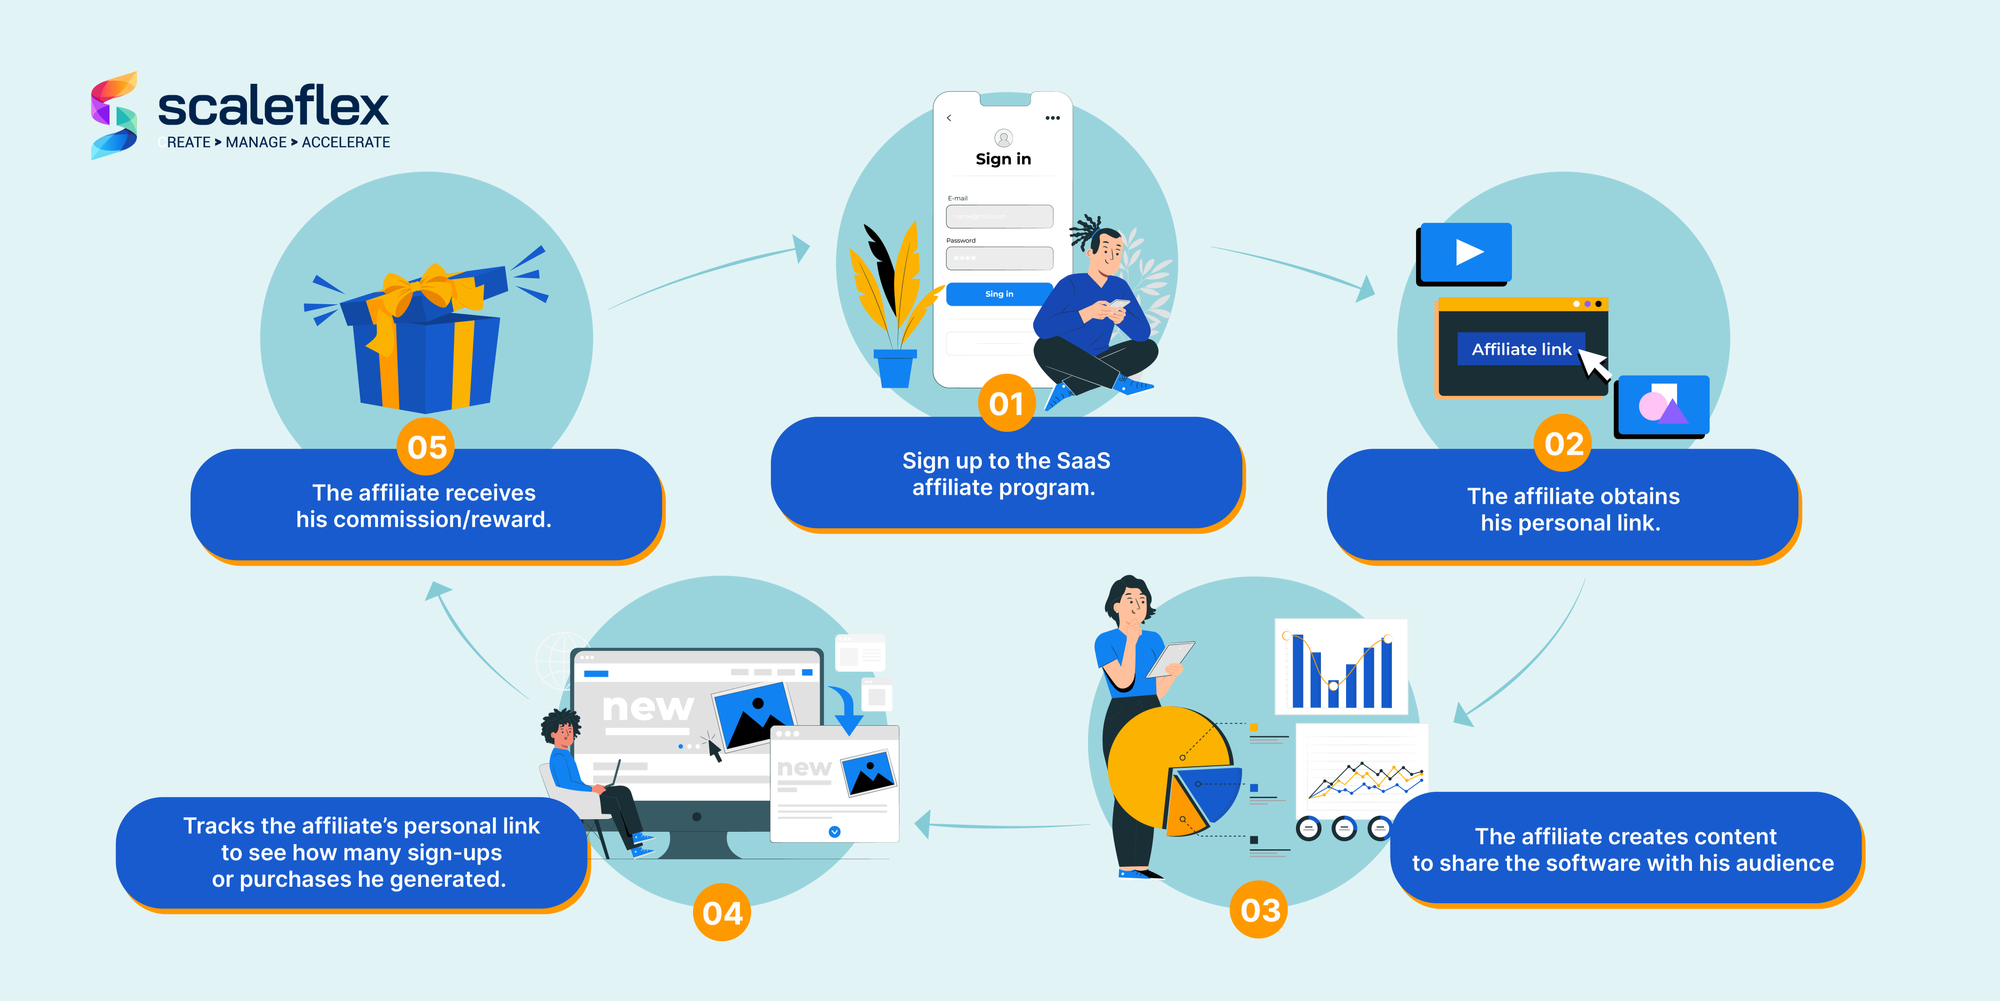 The five essential steps in a SaaS Affiliate Program Journey are here detailed, going from sign up, to promotion and reward.